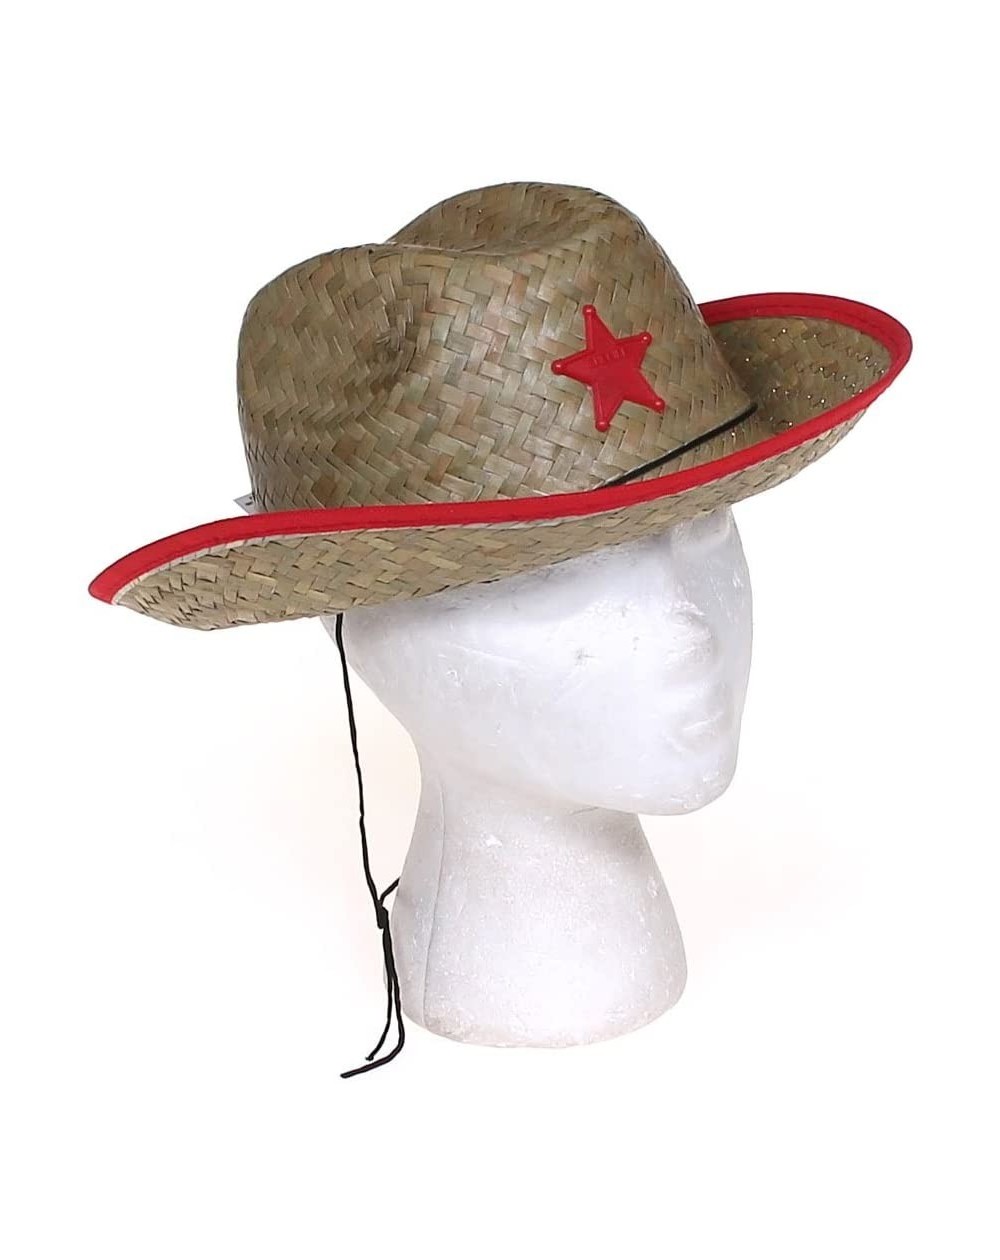 Party Hats Kids Straw Cowboy Sheriff Hat w/Star (2 Pack) - CM111PFRX7T $8.98